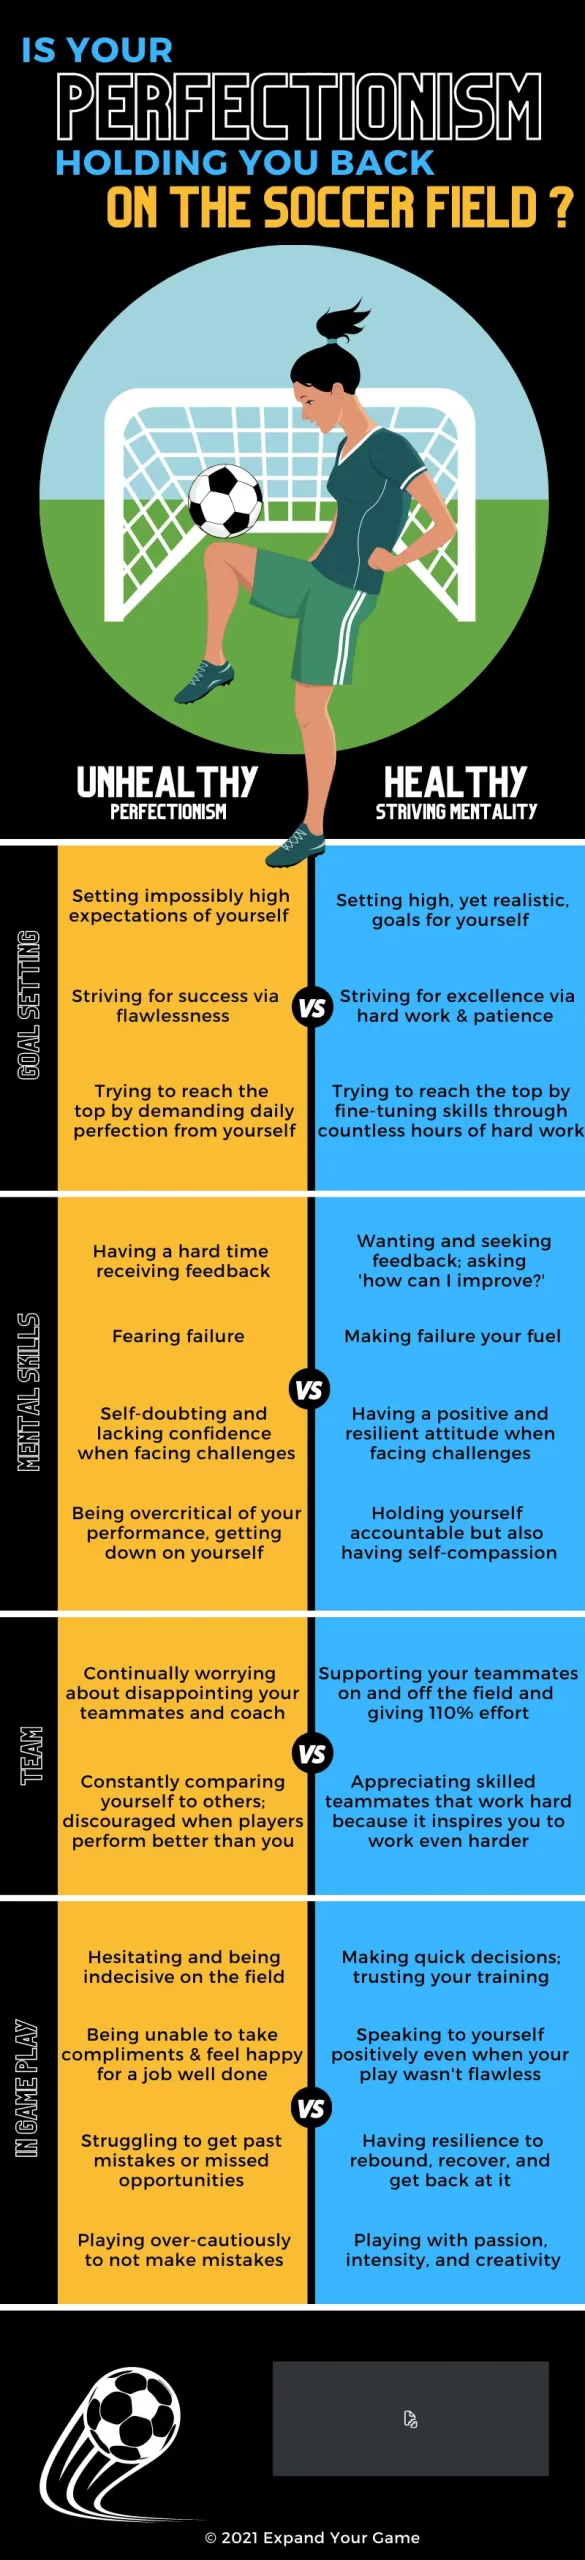 Is your perfectionism holding you back on the soccer field? Unhealthy perfectionism vs healthy striving mentality